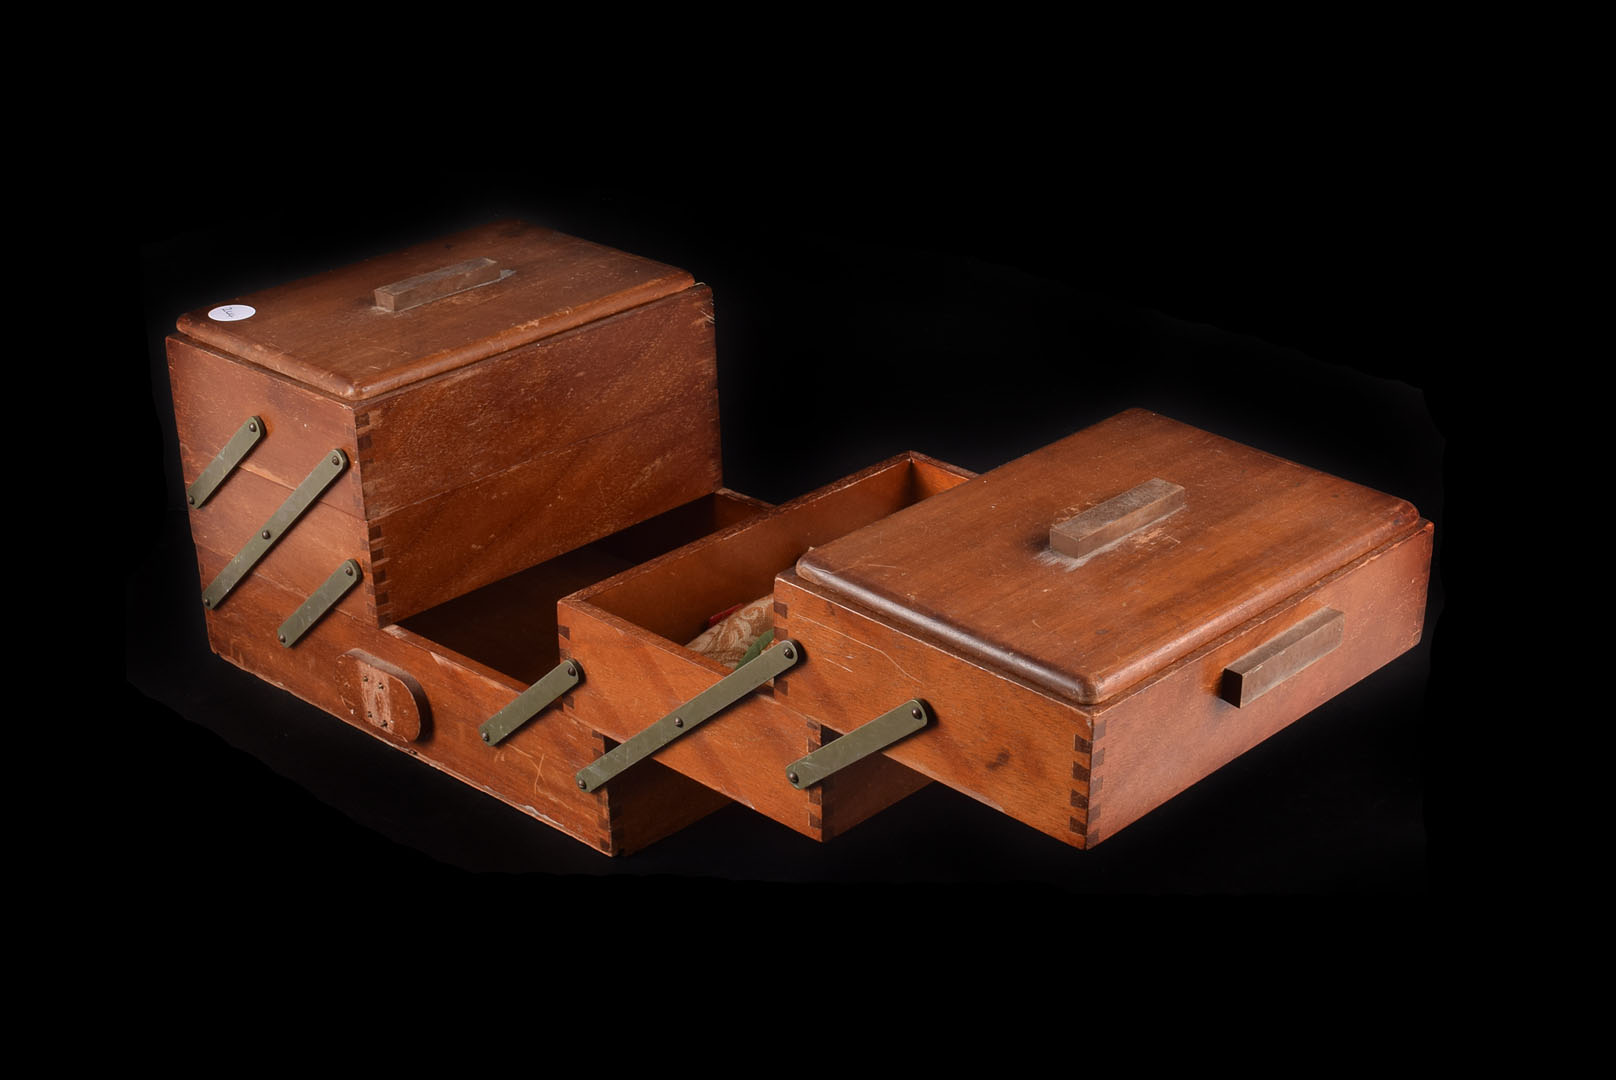 A wooden cantilever sewing box, with 3 tier construction and 5 compartments together with a small